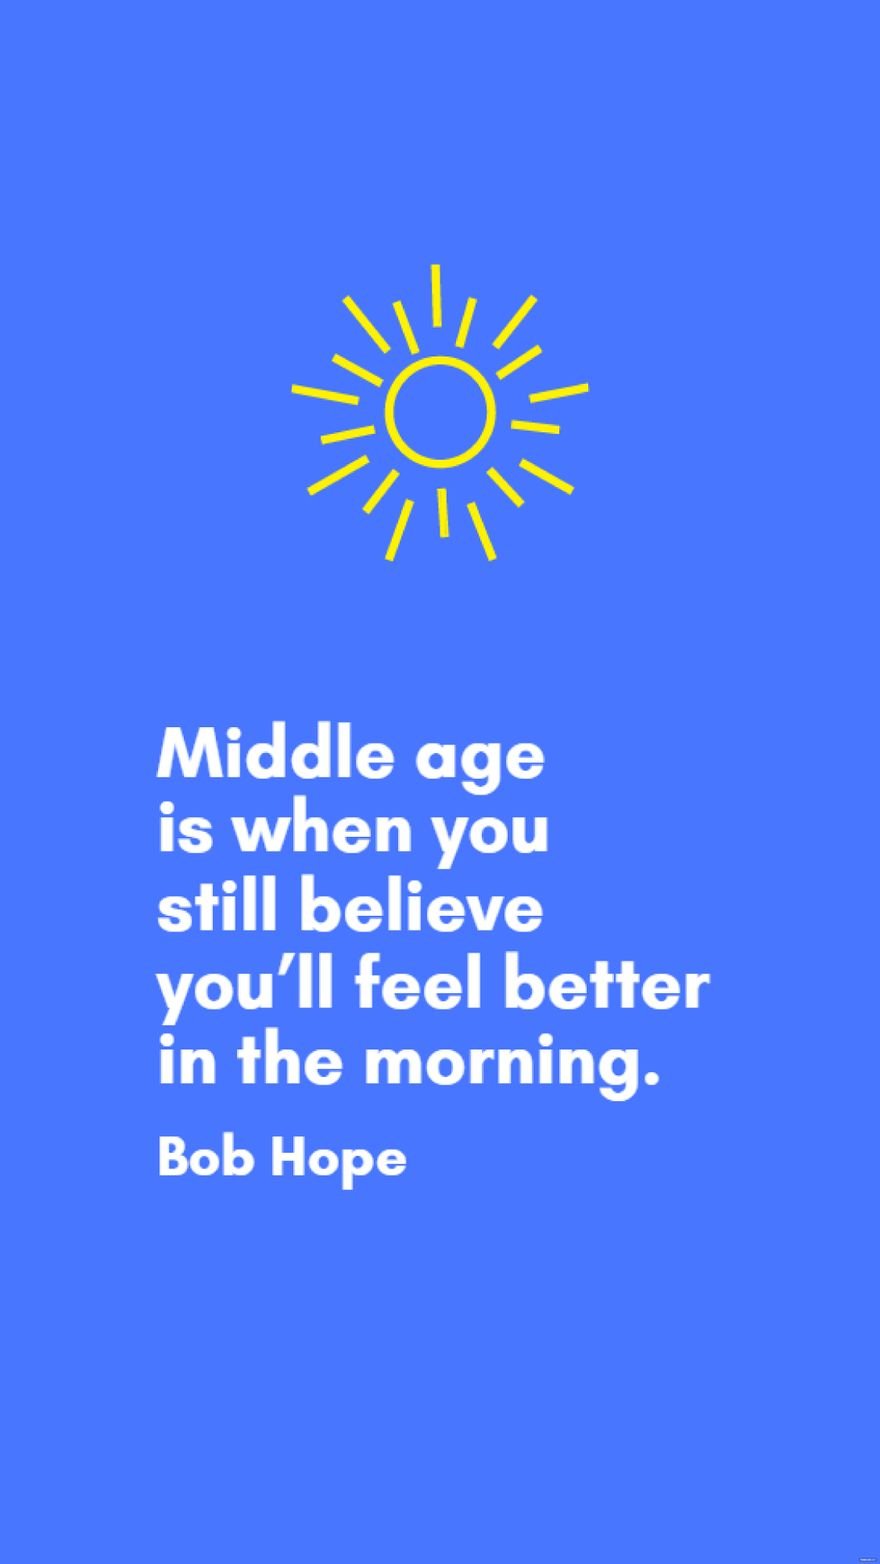 Free Bob Hope - Middle age is when you still believe you’ll feel better in the morning.